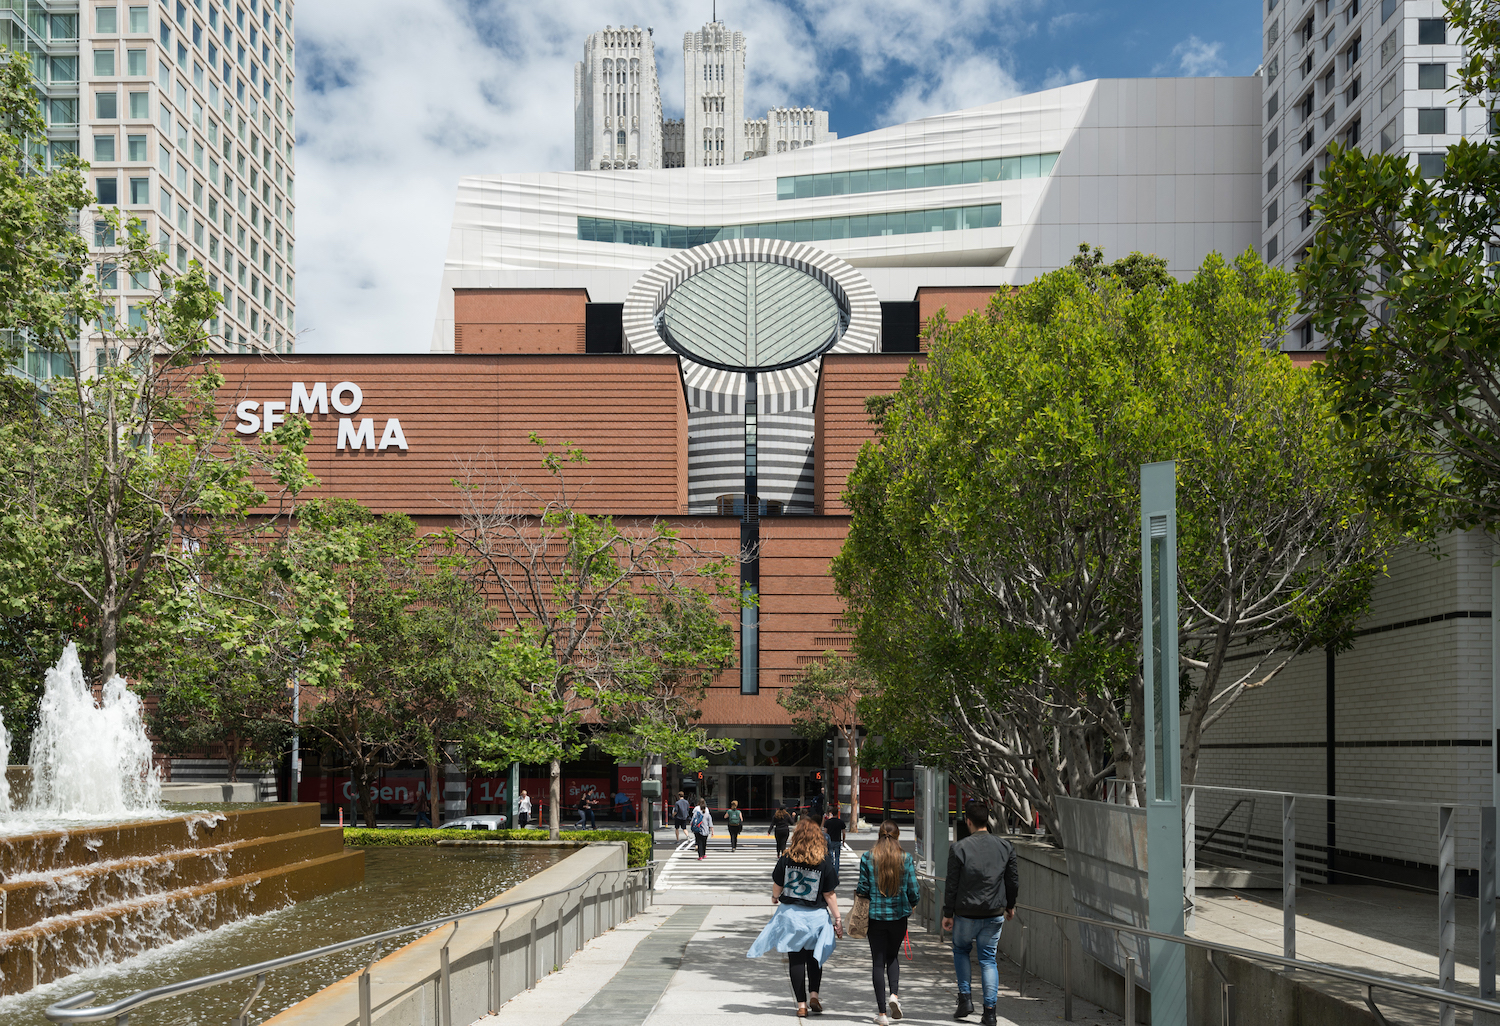 photo SFMOMA showing 1995 building and additon